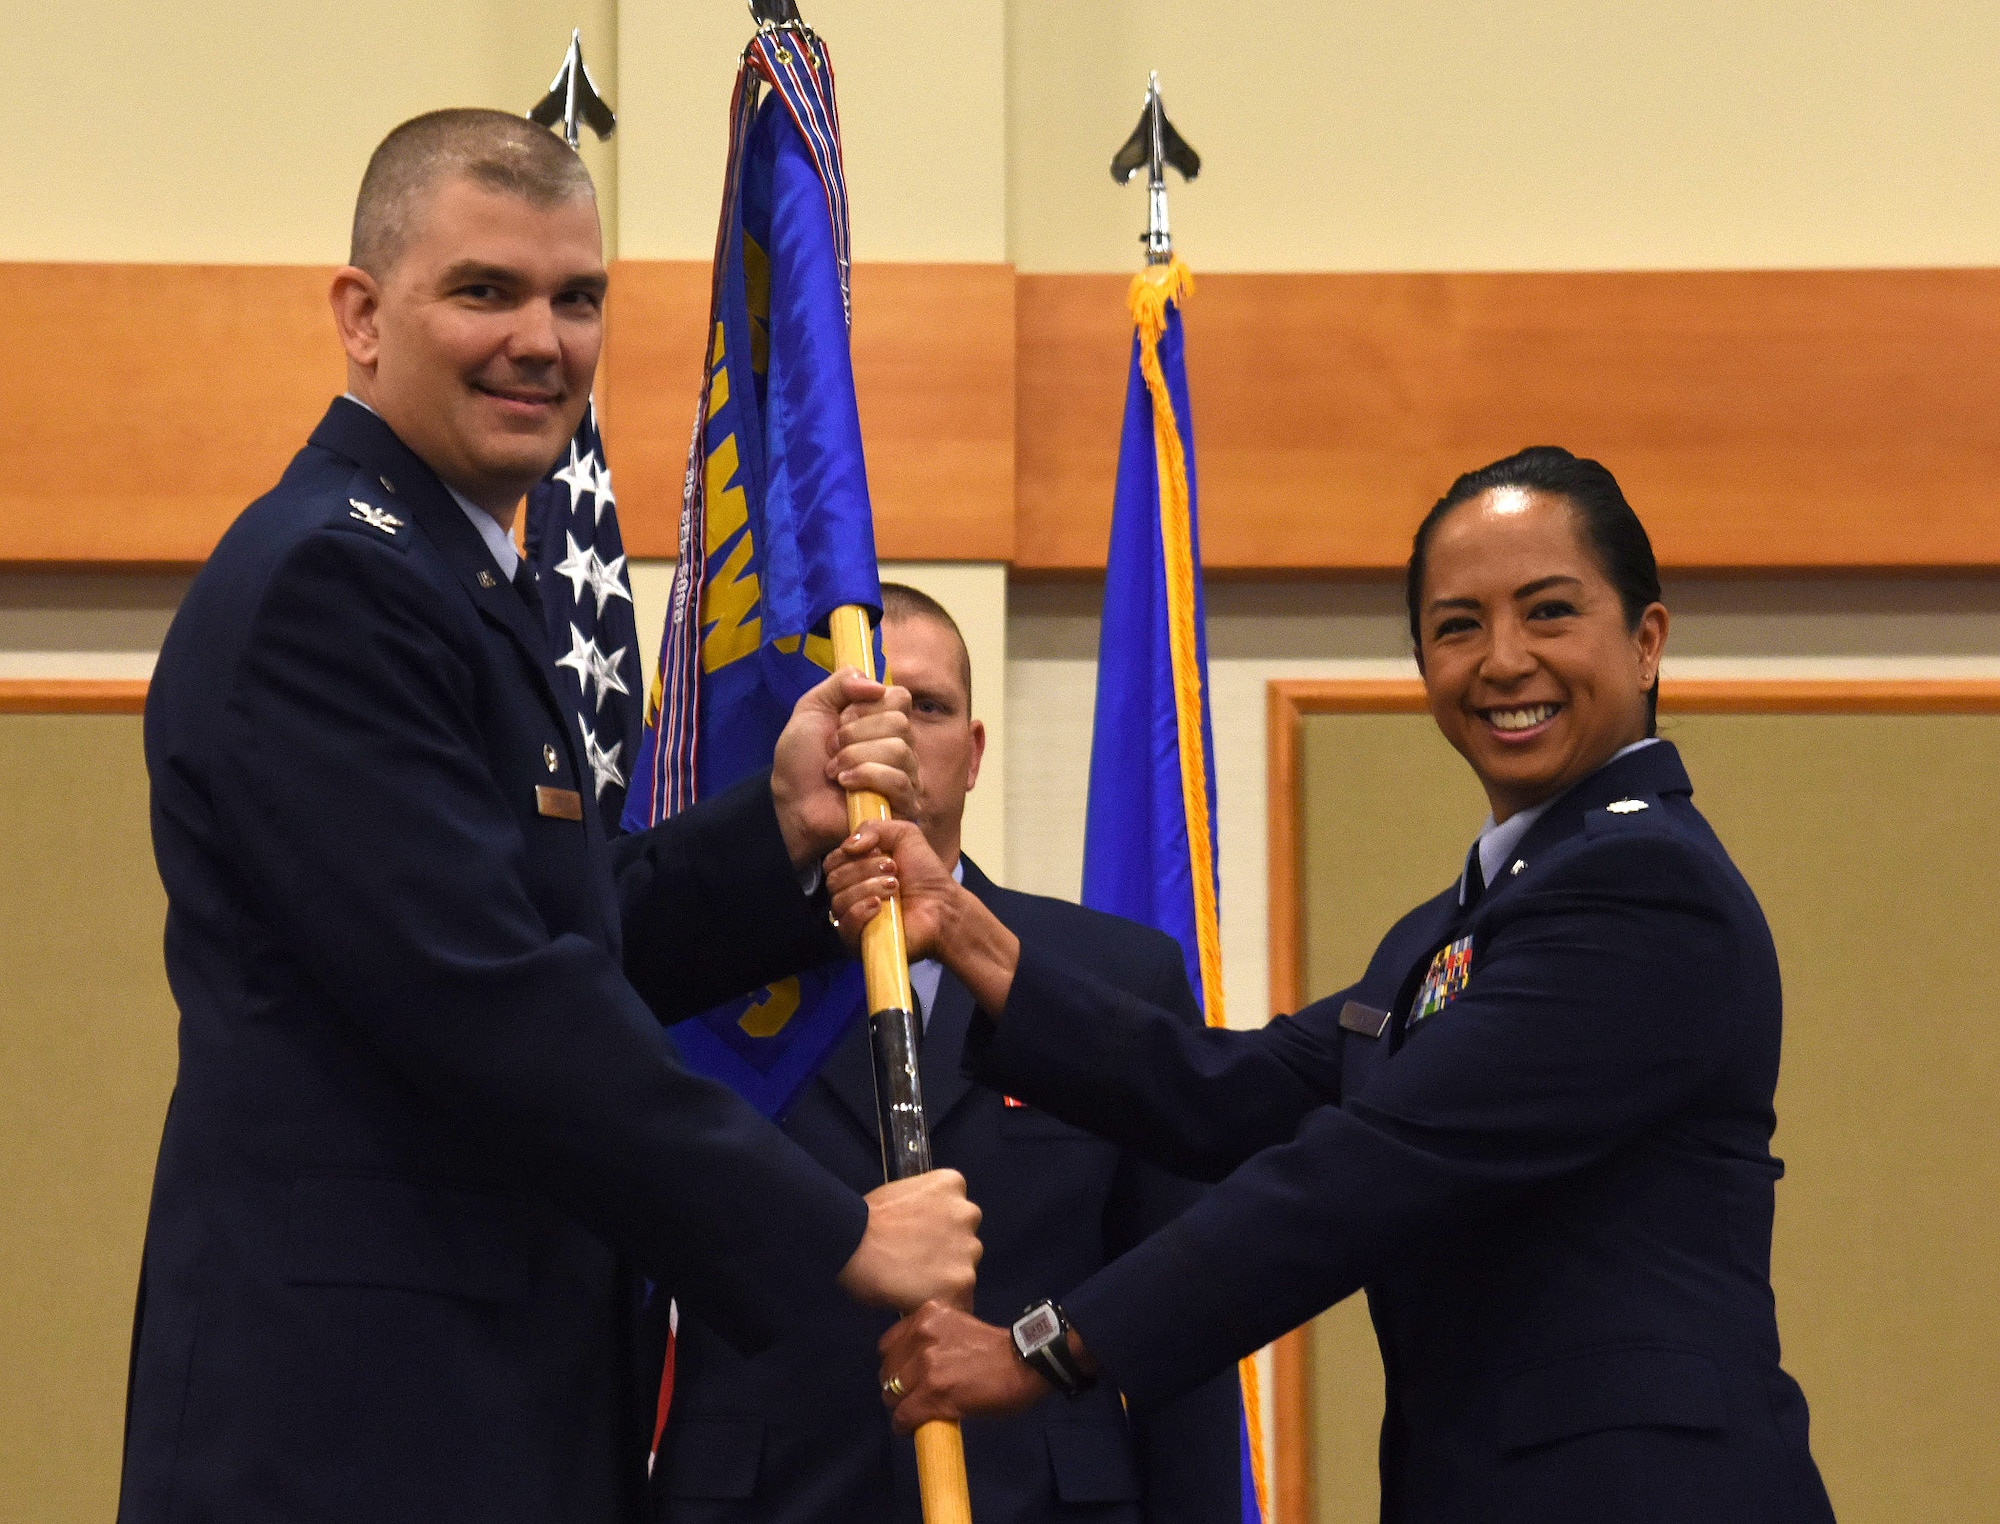 Lt. Col. Marybeth Luna, right, accepts command of the 341st Medical Support Squadron from Col. Craig Forcum, 341st Medical Group commander, during a change of command ceremony at the Grizzly Bend, Malmstrom Air Force Base, Montana, July 6, 2017. Master Sgt. Jason Whitehead, 341st MDG first sergeant, looks on. (U.S. Air Force photo/Senior Airman Jaeda Tookes)